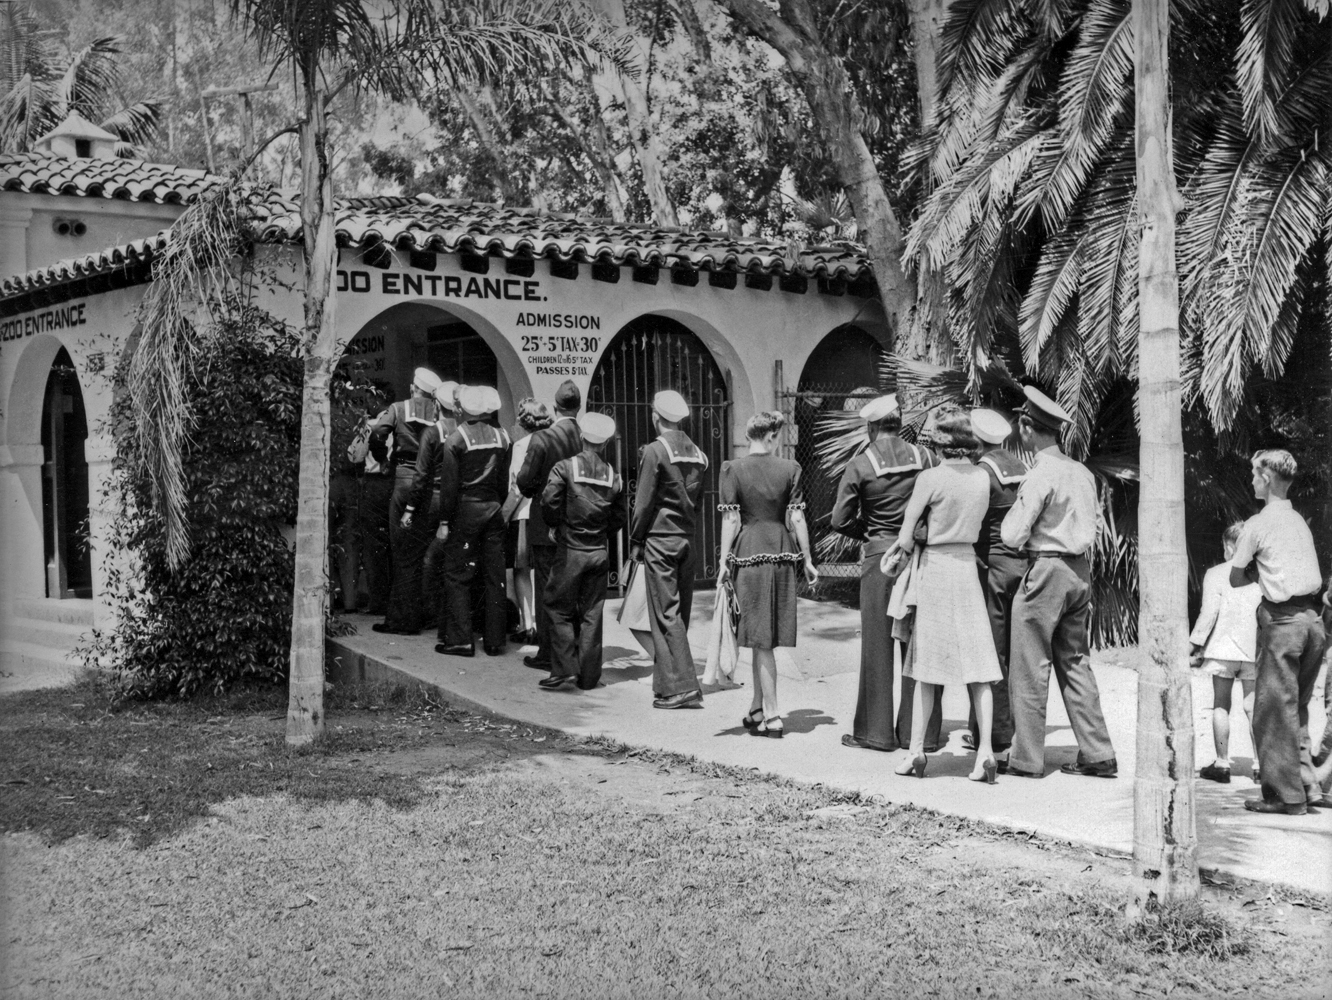 Military personnel entering the Zoo